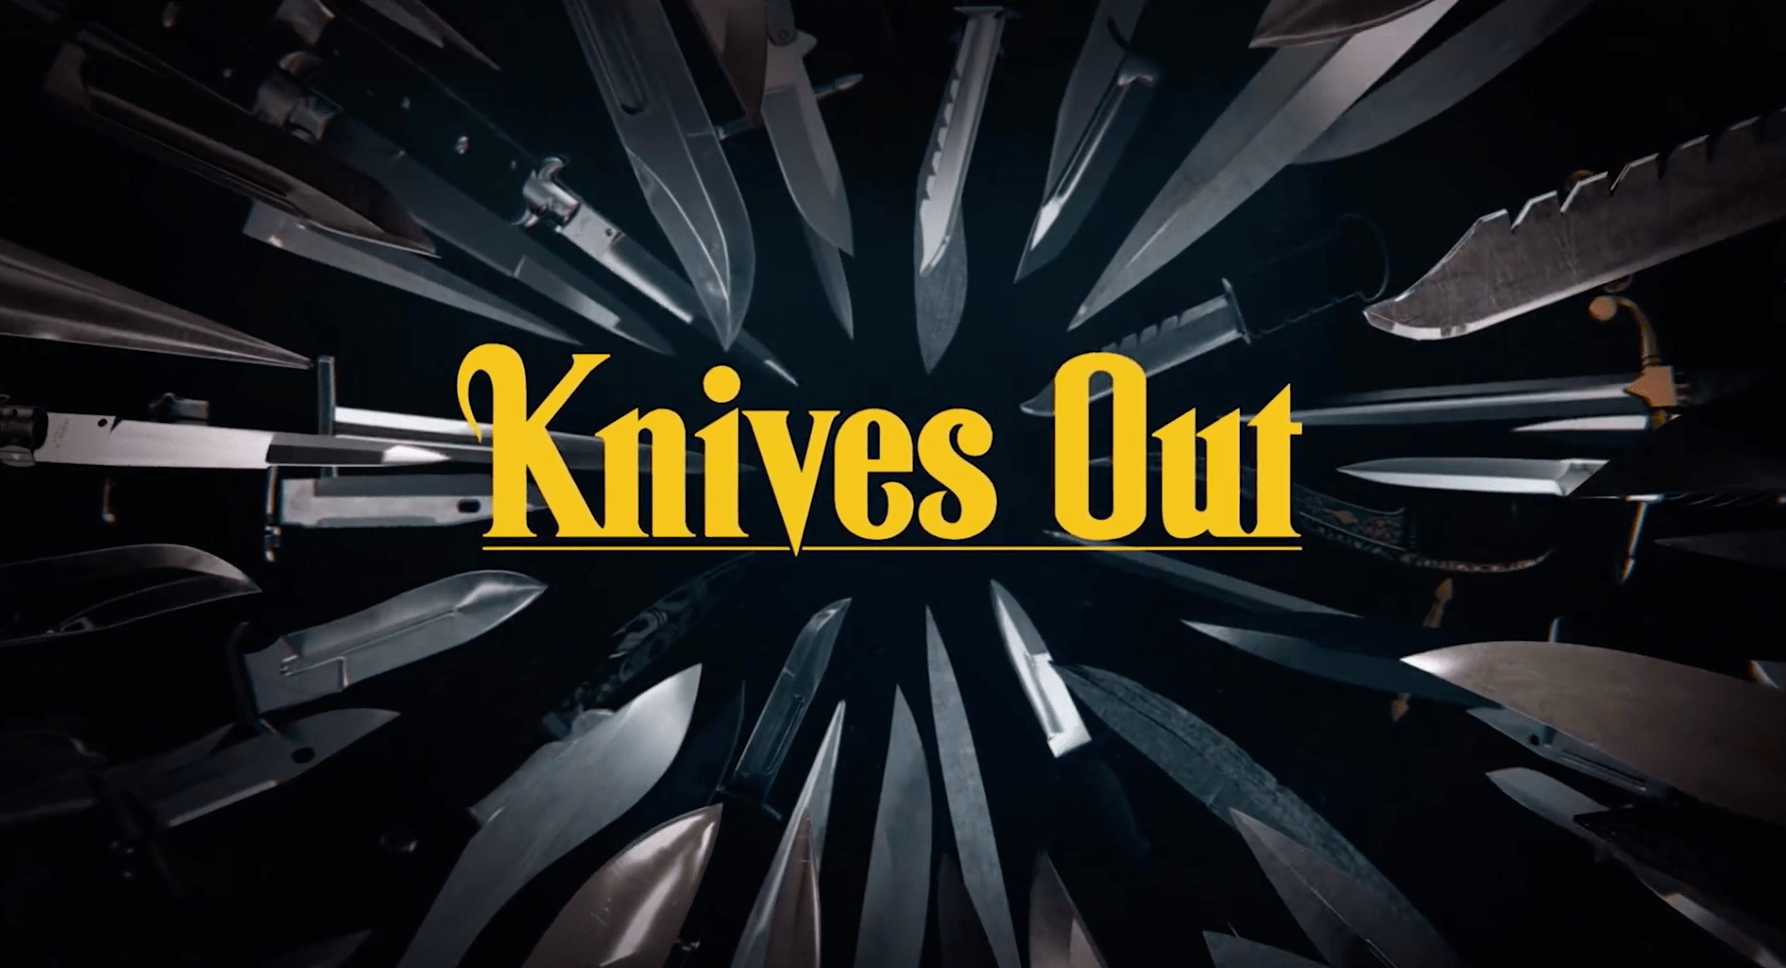 The Gauntlet on Twitter: "For fans of Knives Out, a qshort video showing  how The Made Shop built the title font from old Agatha Christie cover titles.  https://t.co/yixX2TrKAw https://t.co/eHLMZBm11o" / Twitter